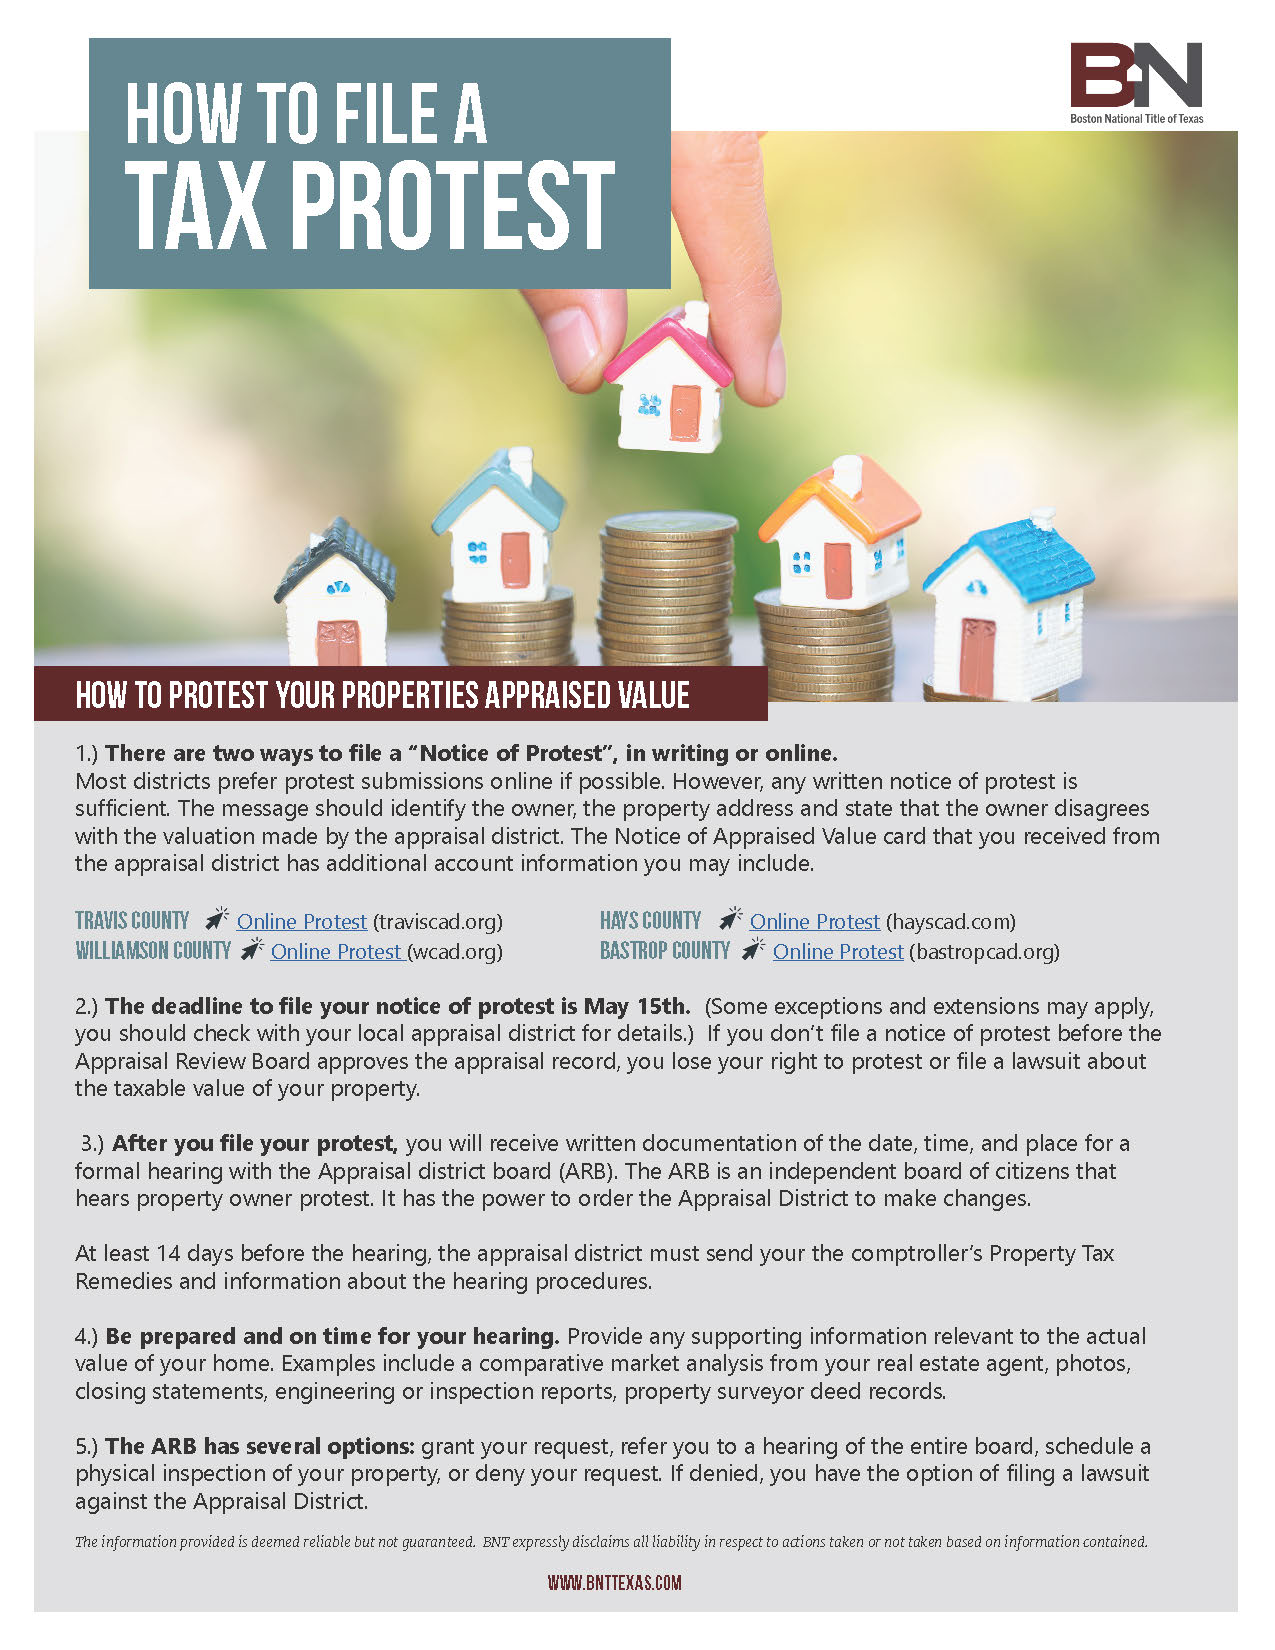 Property Tax Protest - Central Texas